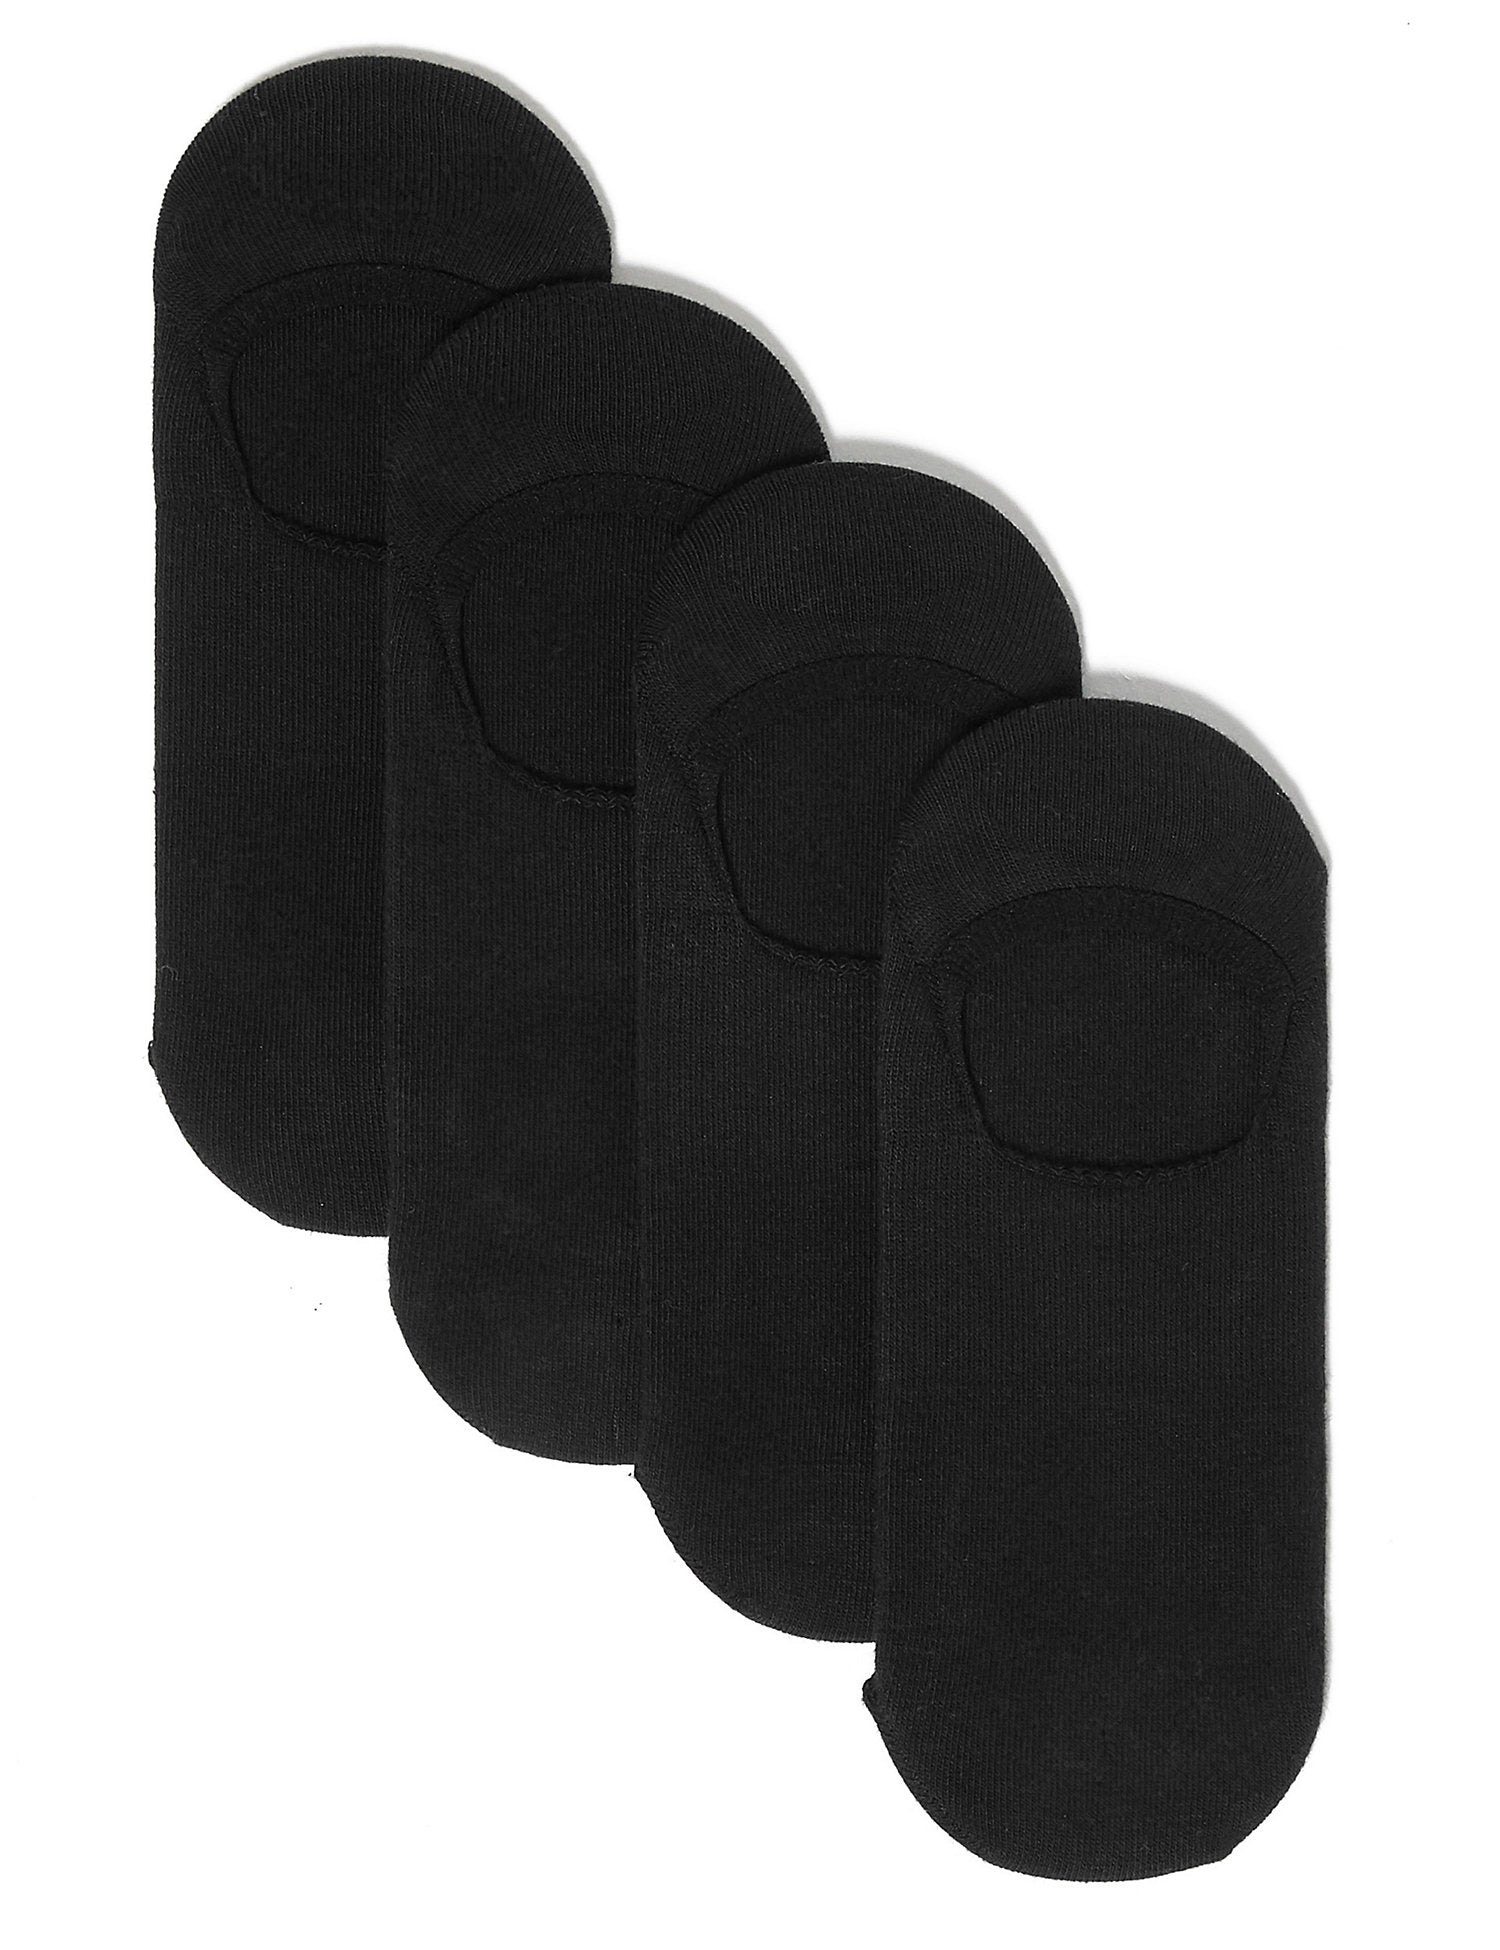 4 Pack Cotton Invisible Trainer Liners